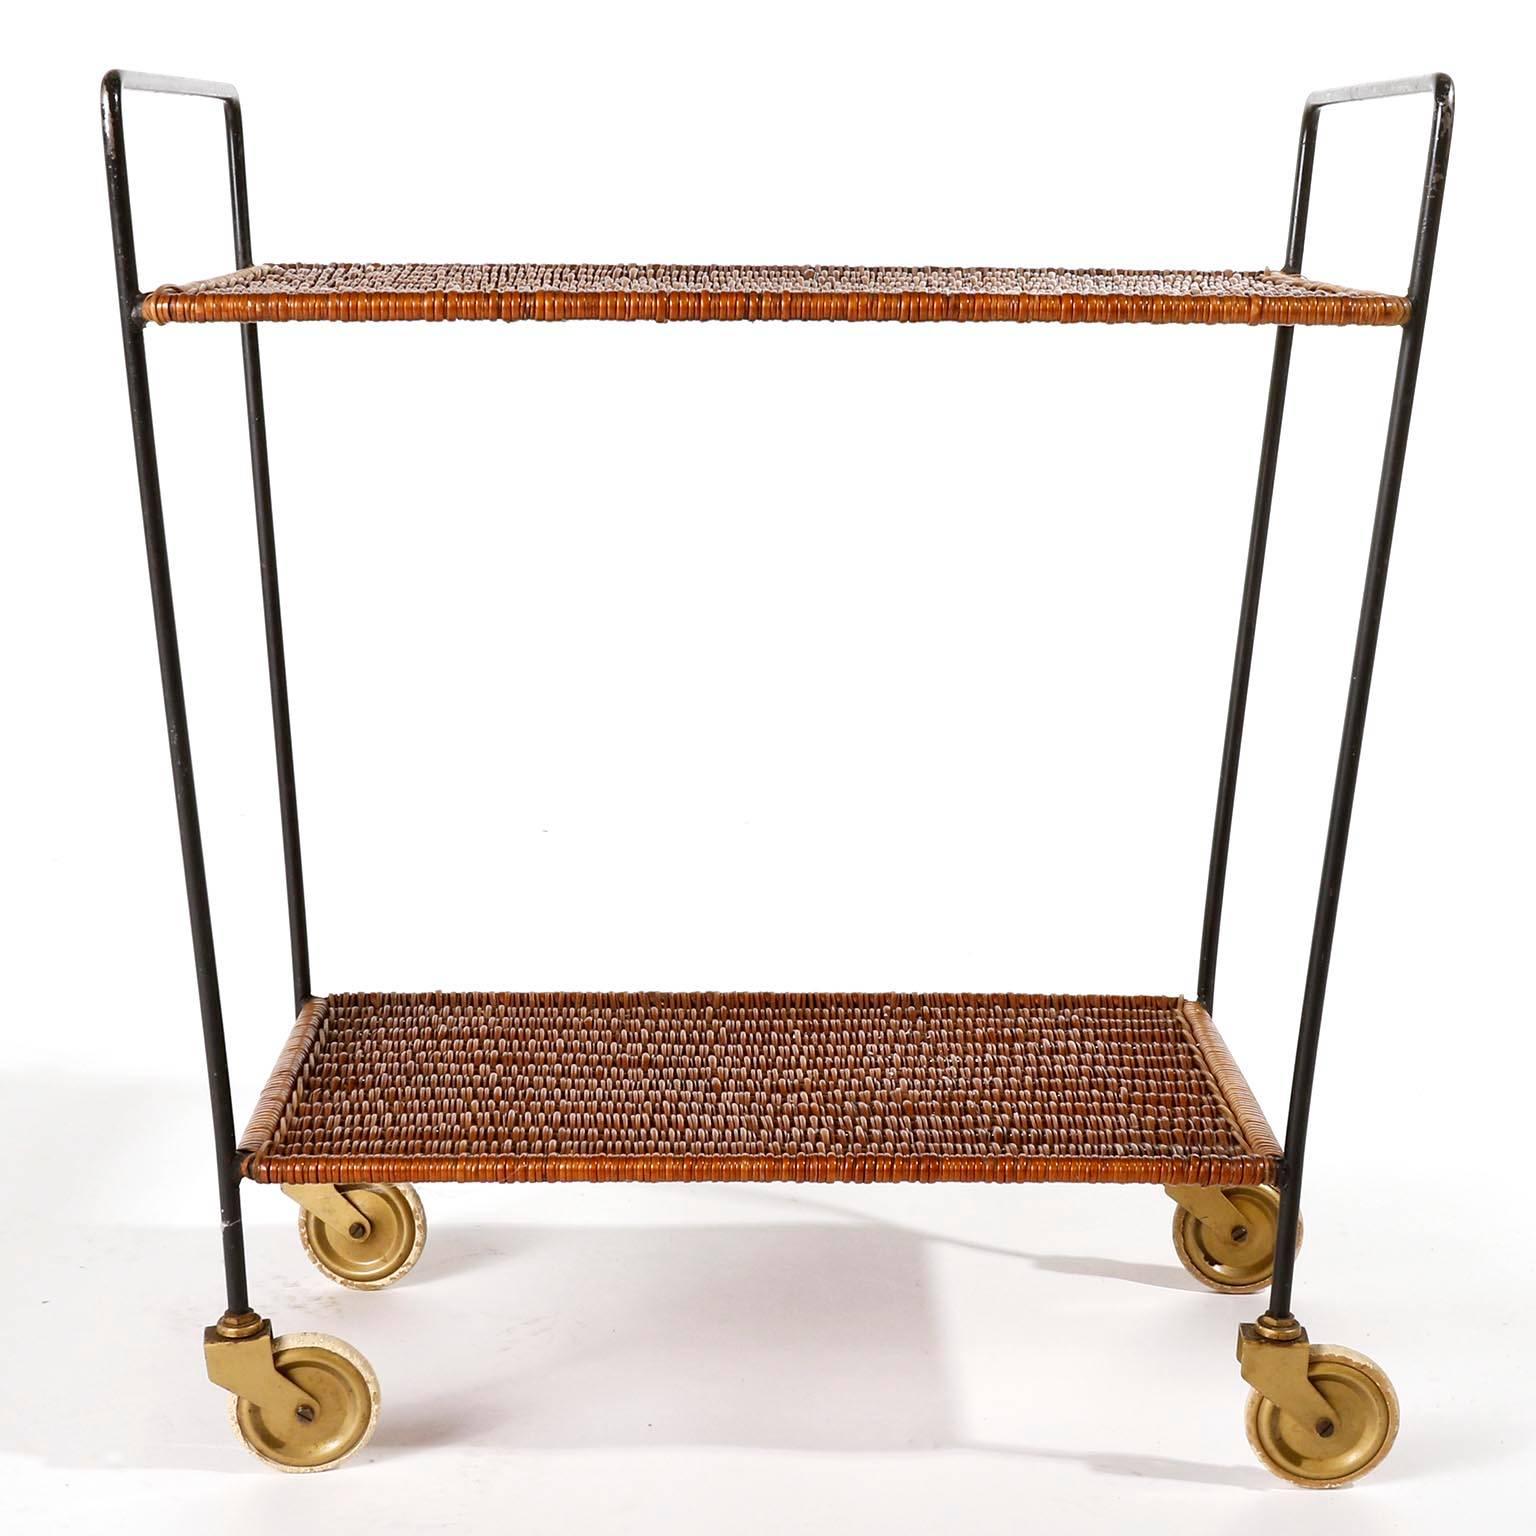 A beautiful trolley table or tea cart made of a black painted metal frame with wicker shelves manufactured in midcentury in Austria, circa 1950.
The wicker is in excellent condition. Wear of use on the metal particularly on the handles.
The trolley